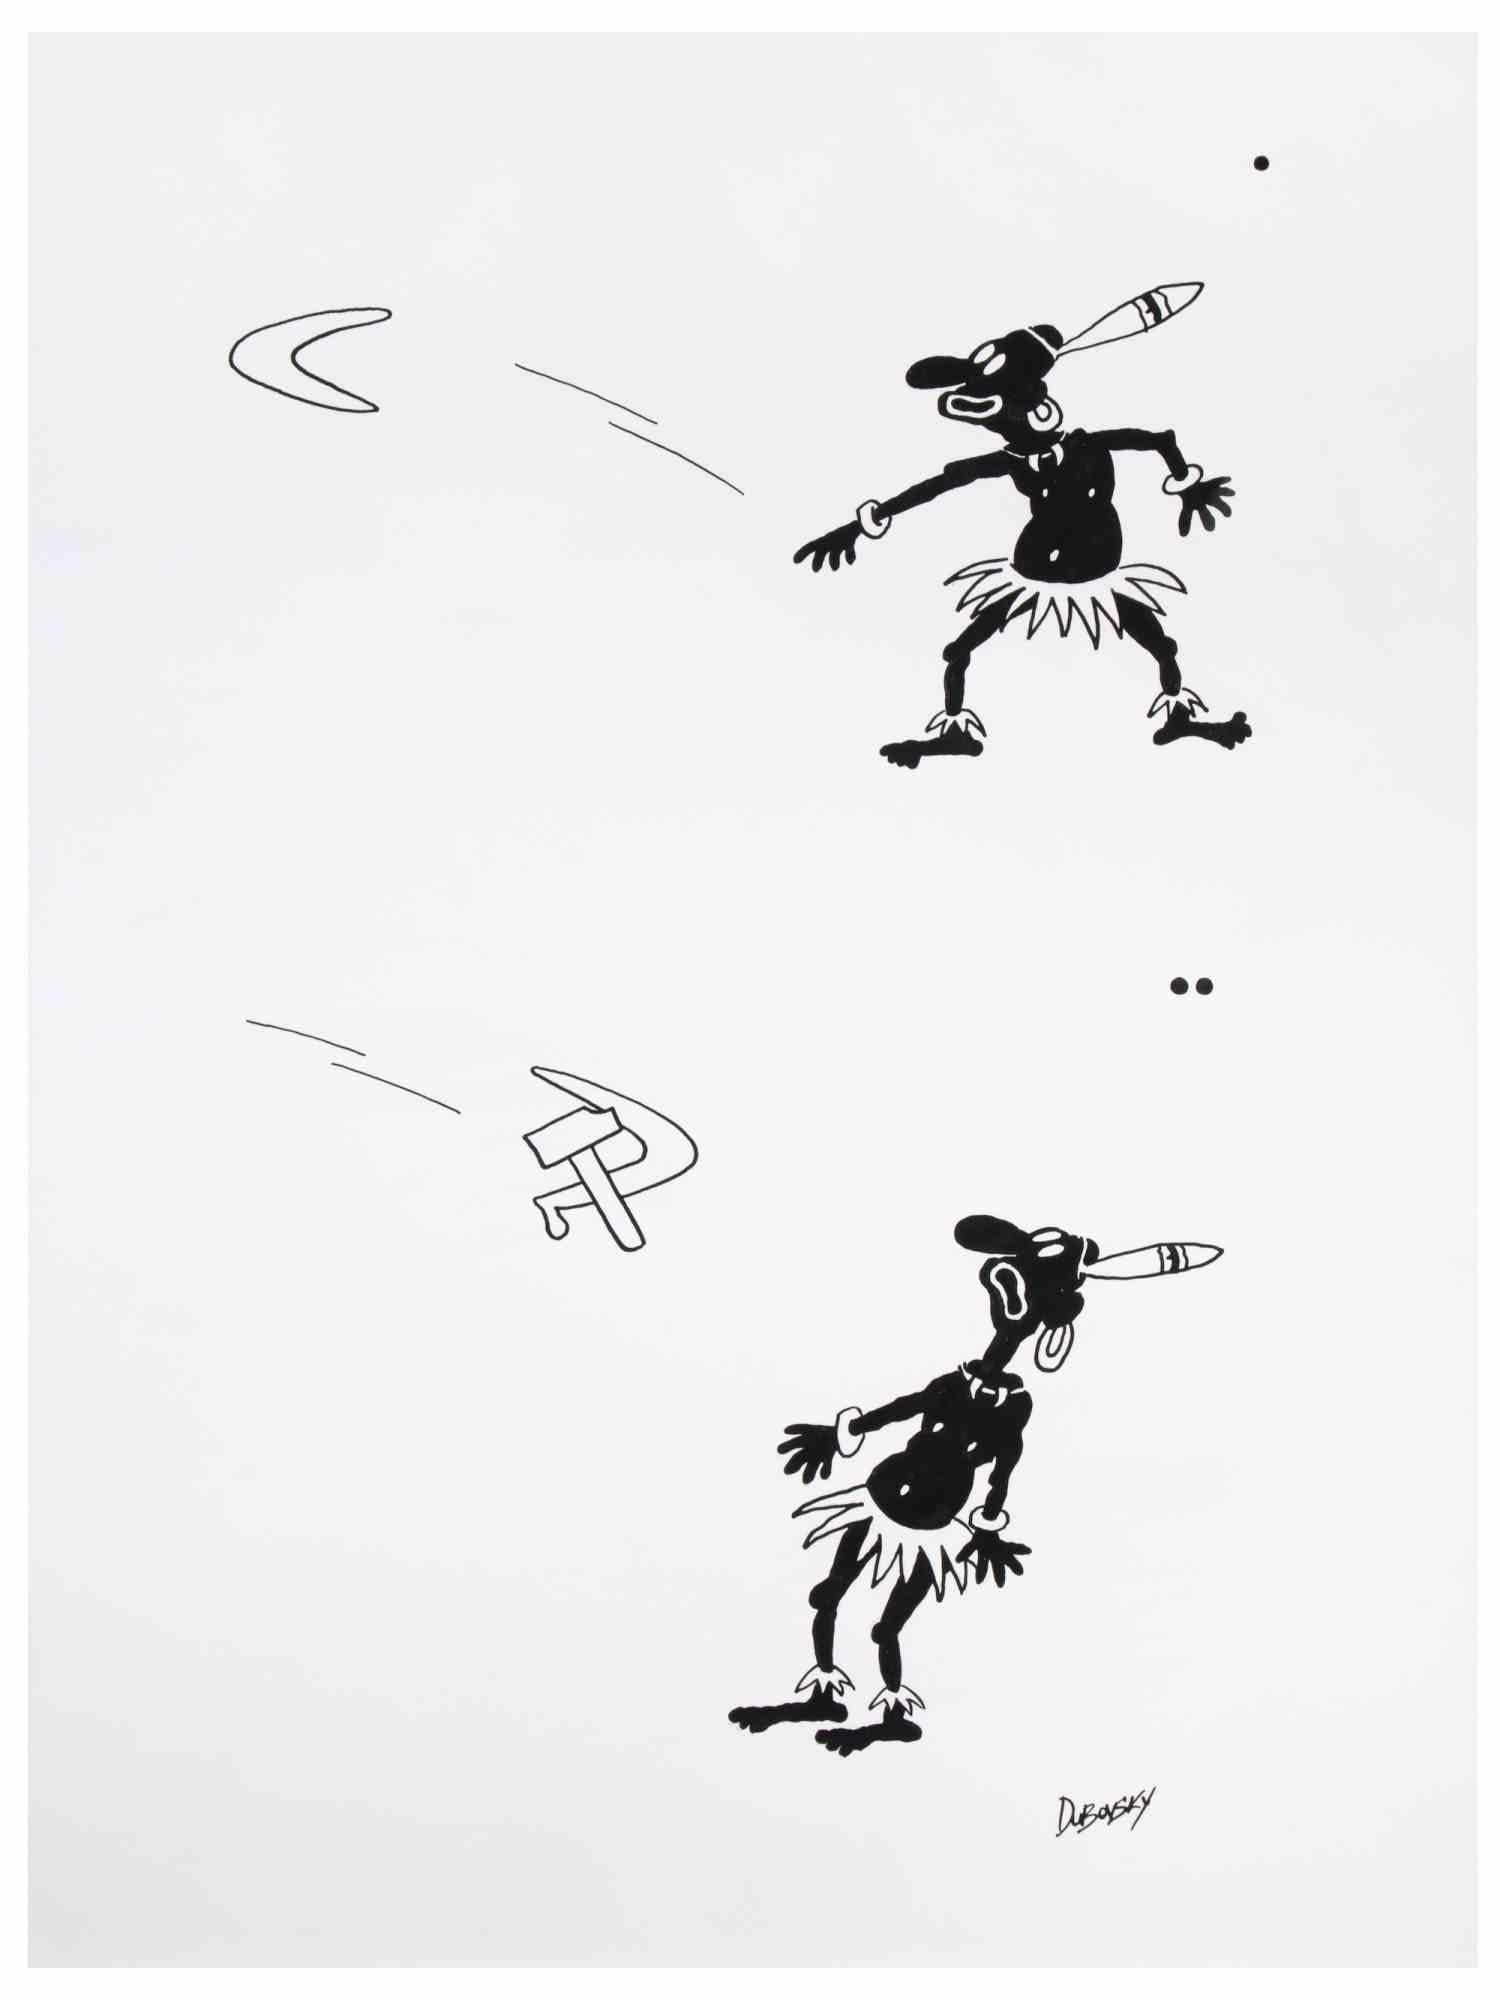 Tribal Boomerang  is a drawing artwork realized by Alexander Dubovsky in the 1980s.

Waterclor and ink drawing on paper.

Hand-signed on the lower right.

The state of preservation is good.